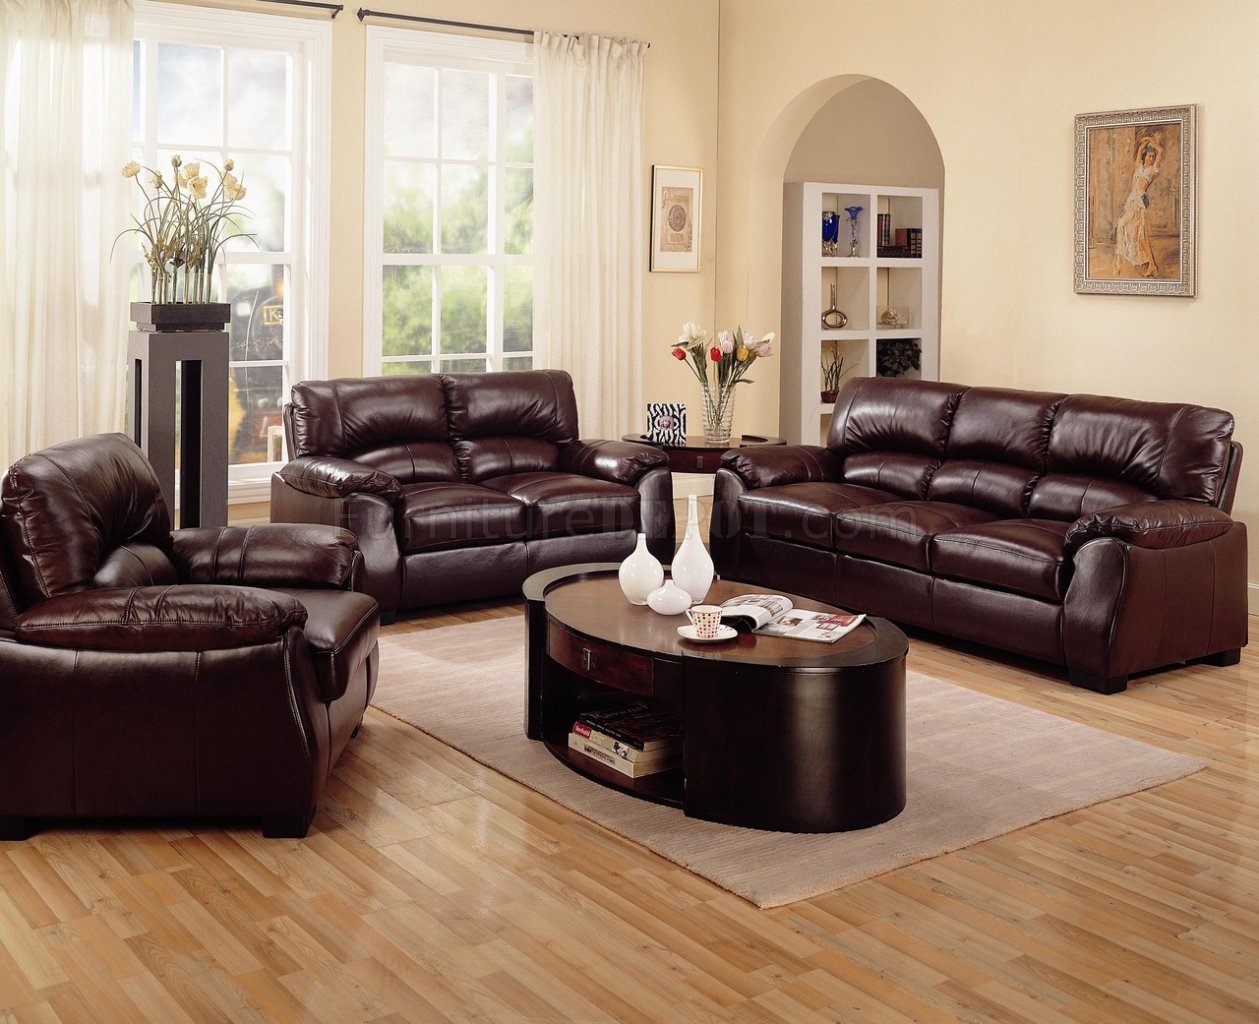 Brown Recliner Chair With Couch Living Room